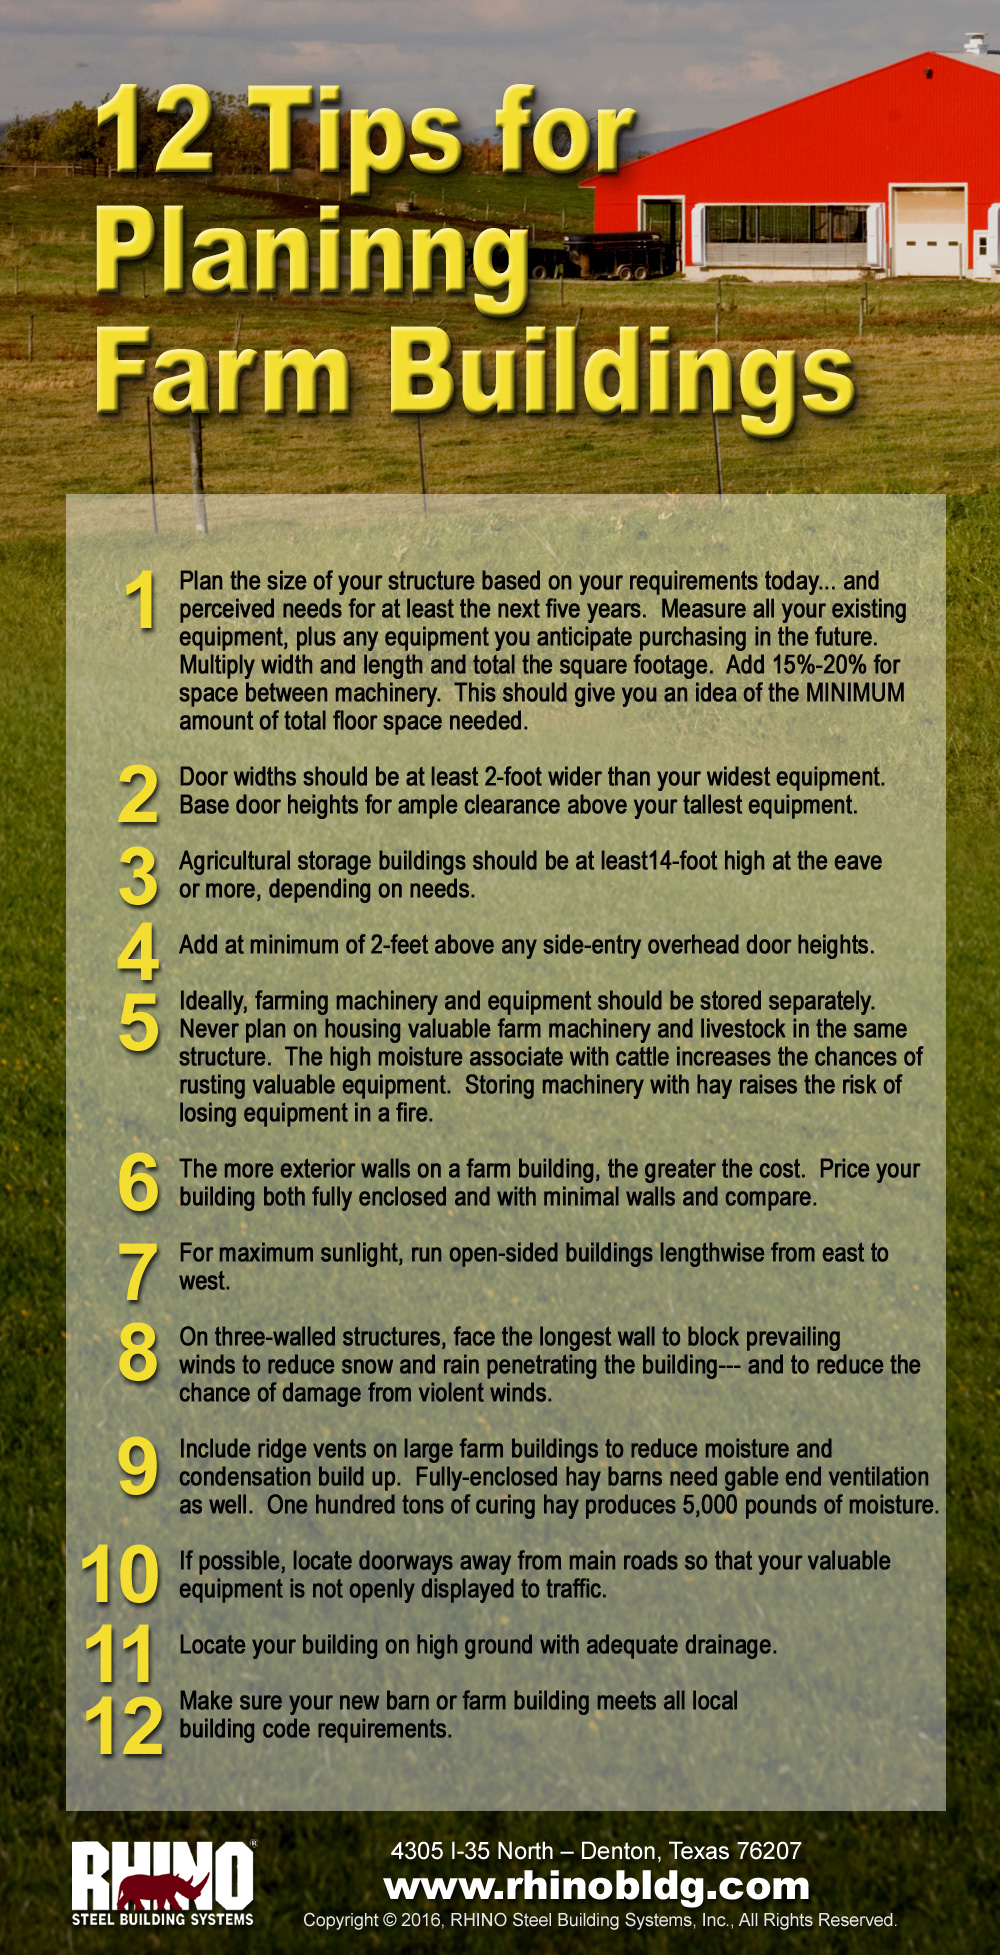 RHINO infographic with 12 Tips for Planning metal barns and steel farm buildings.